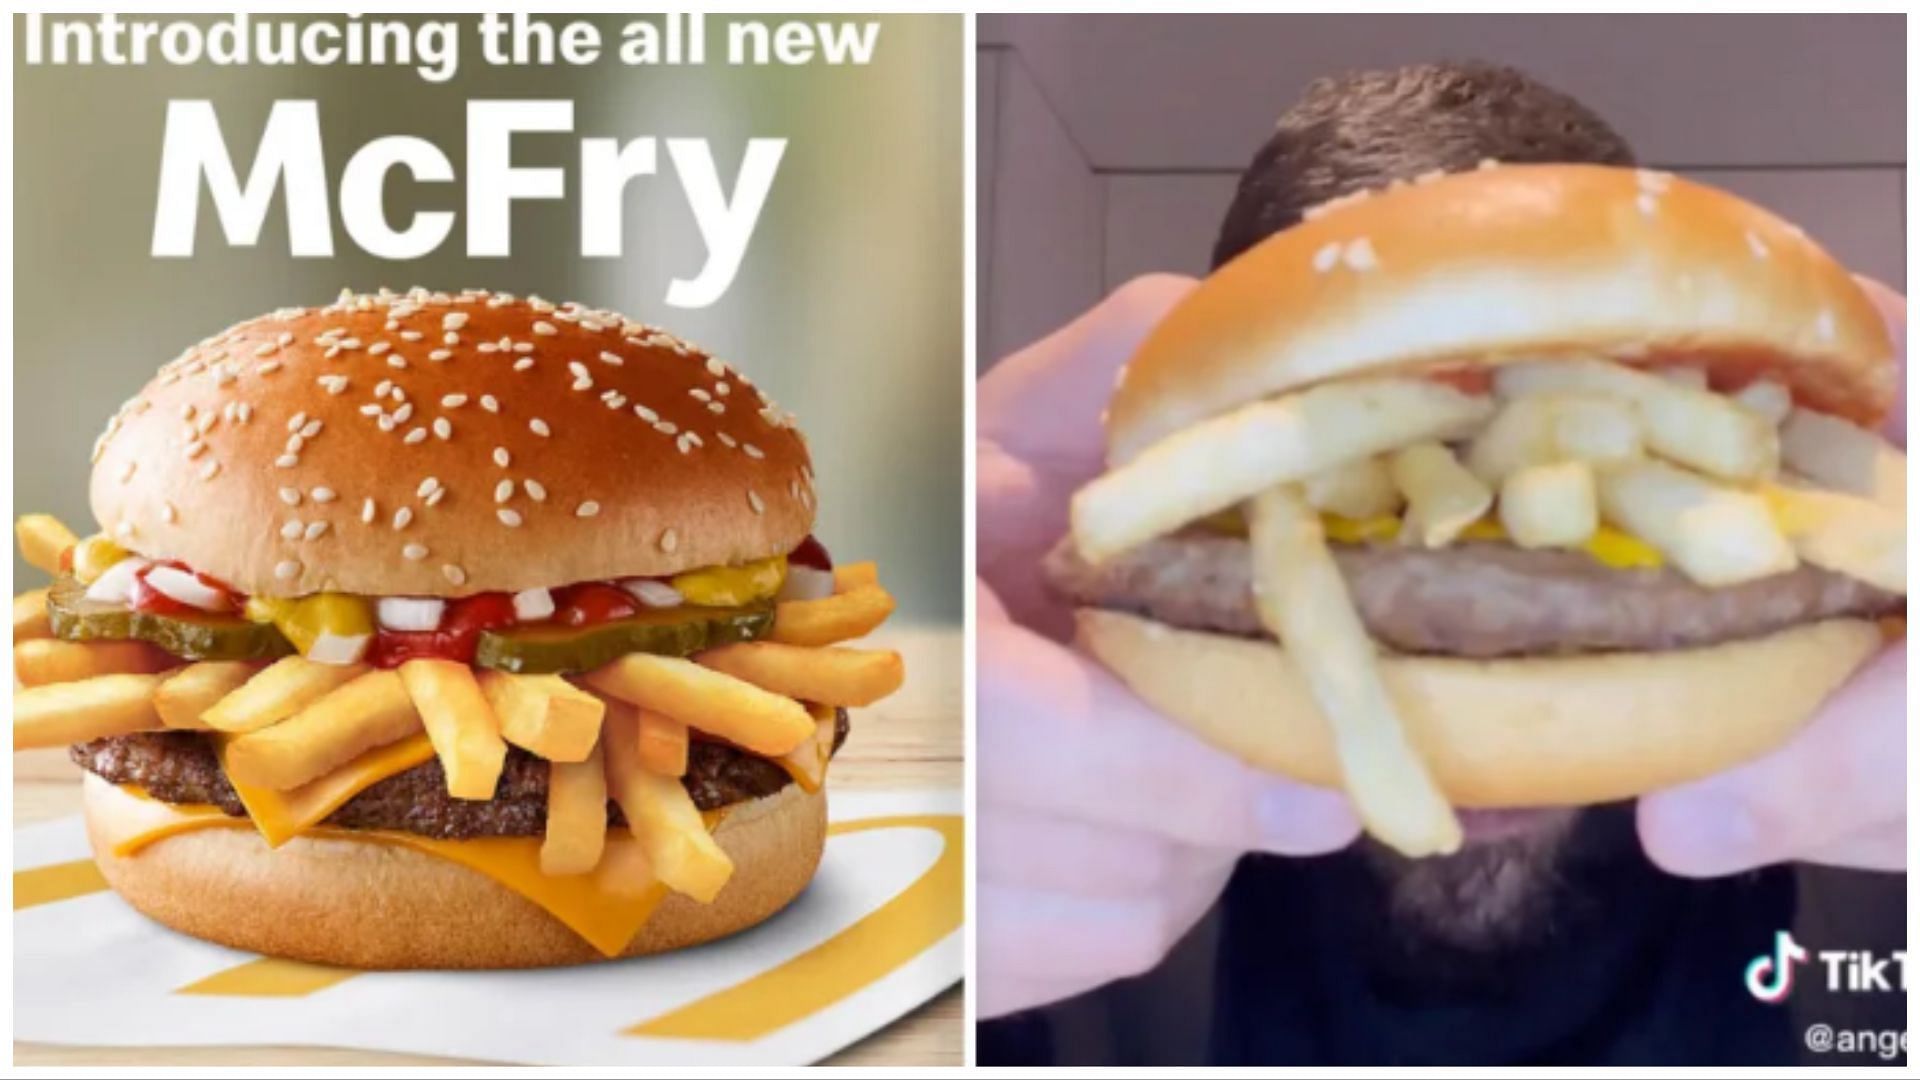 McDonald&#039;s Australia pranked customers for April Fool&#039;s Day by introducing their &#039;new&#039; burger, the McFry. Source: TikTok/Facebook